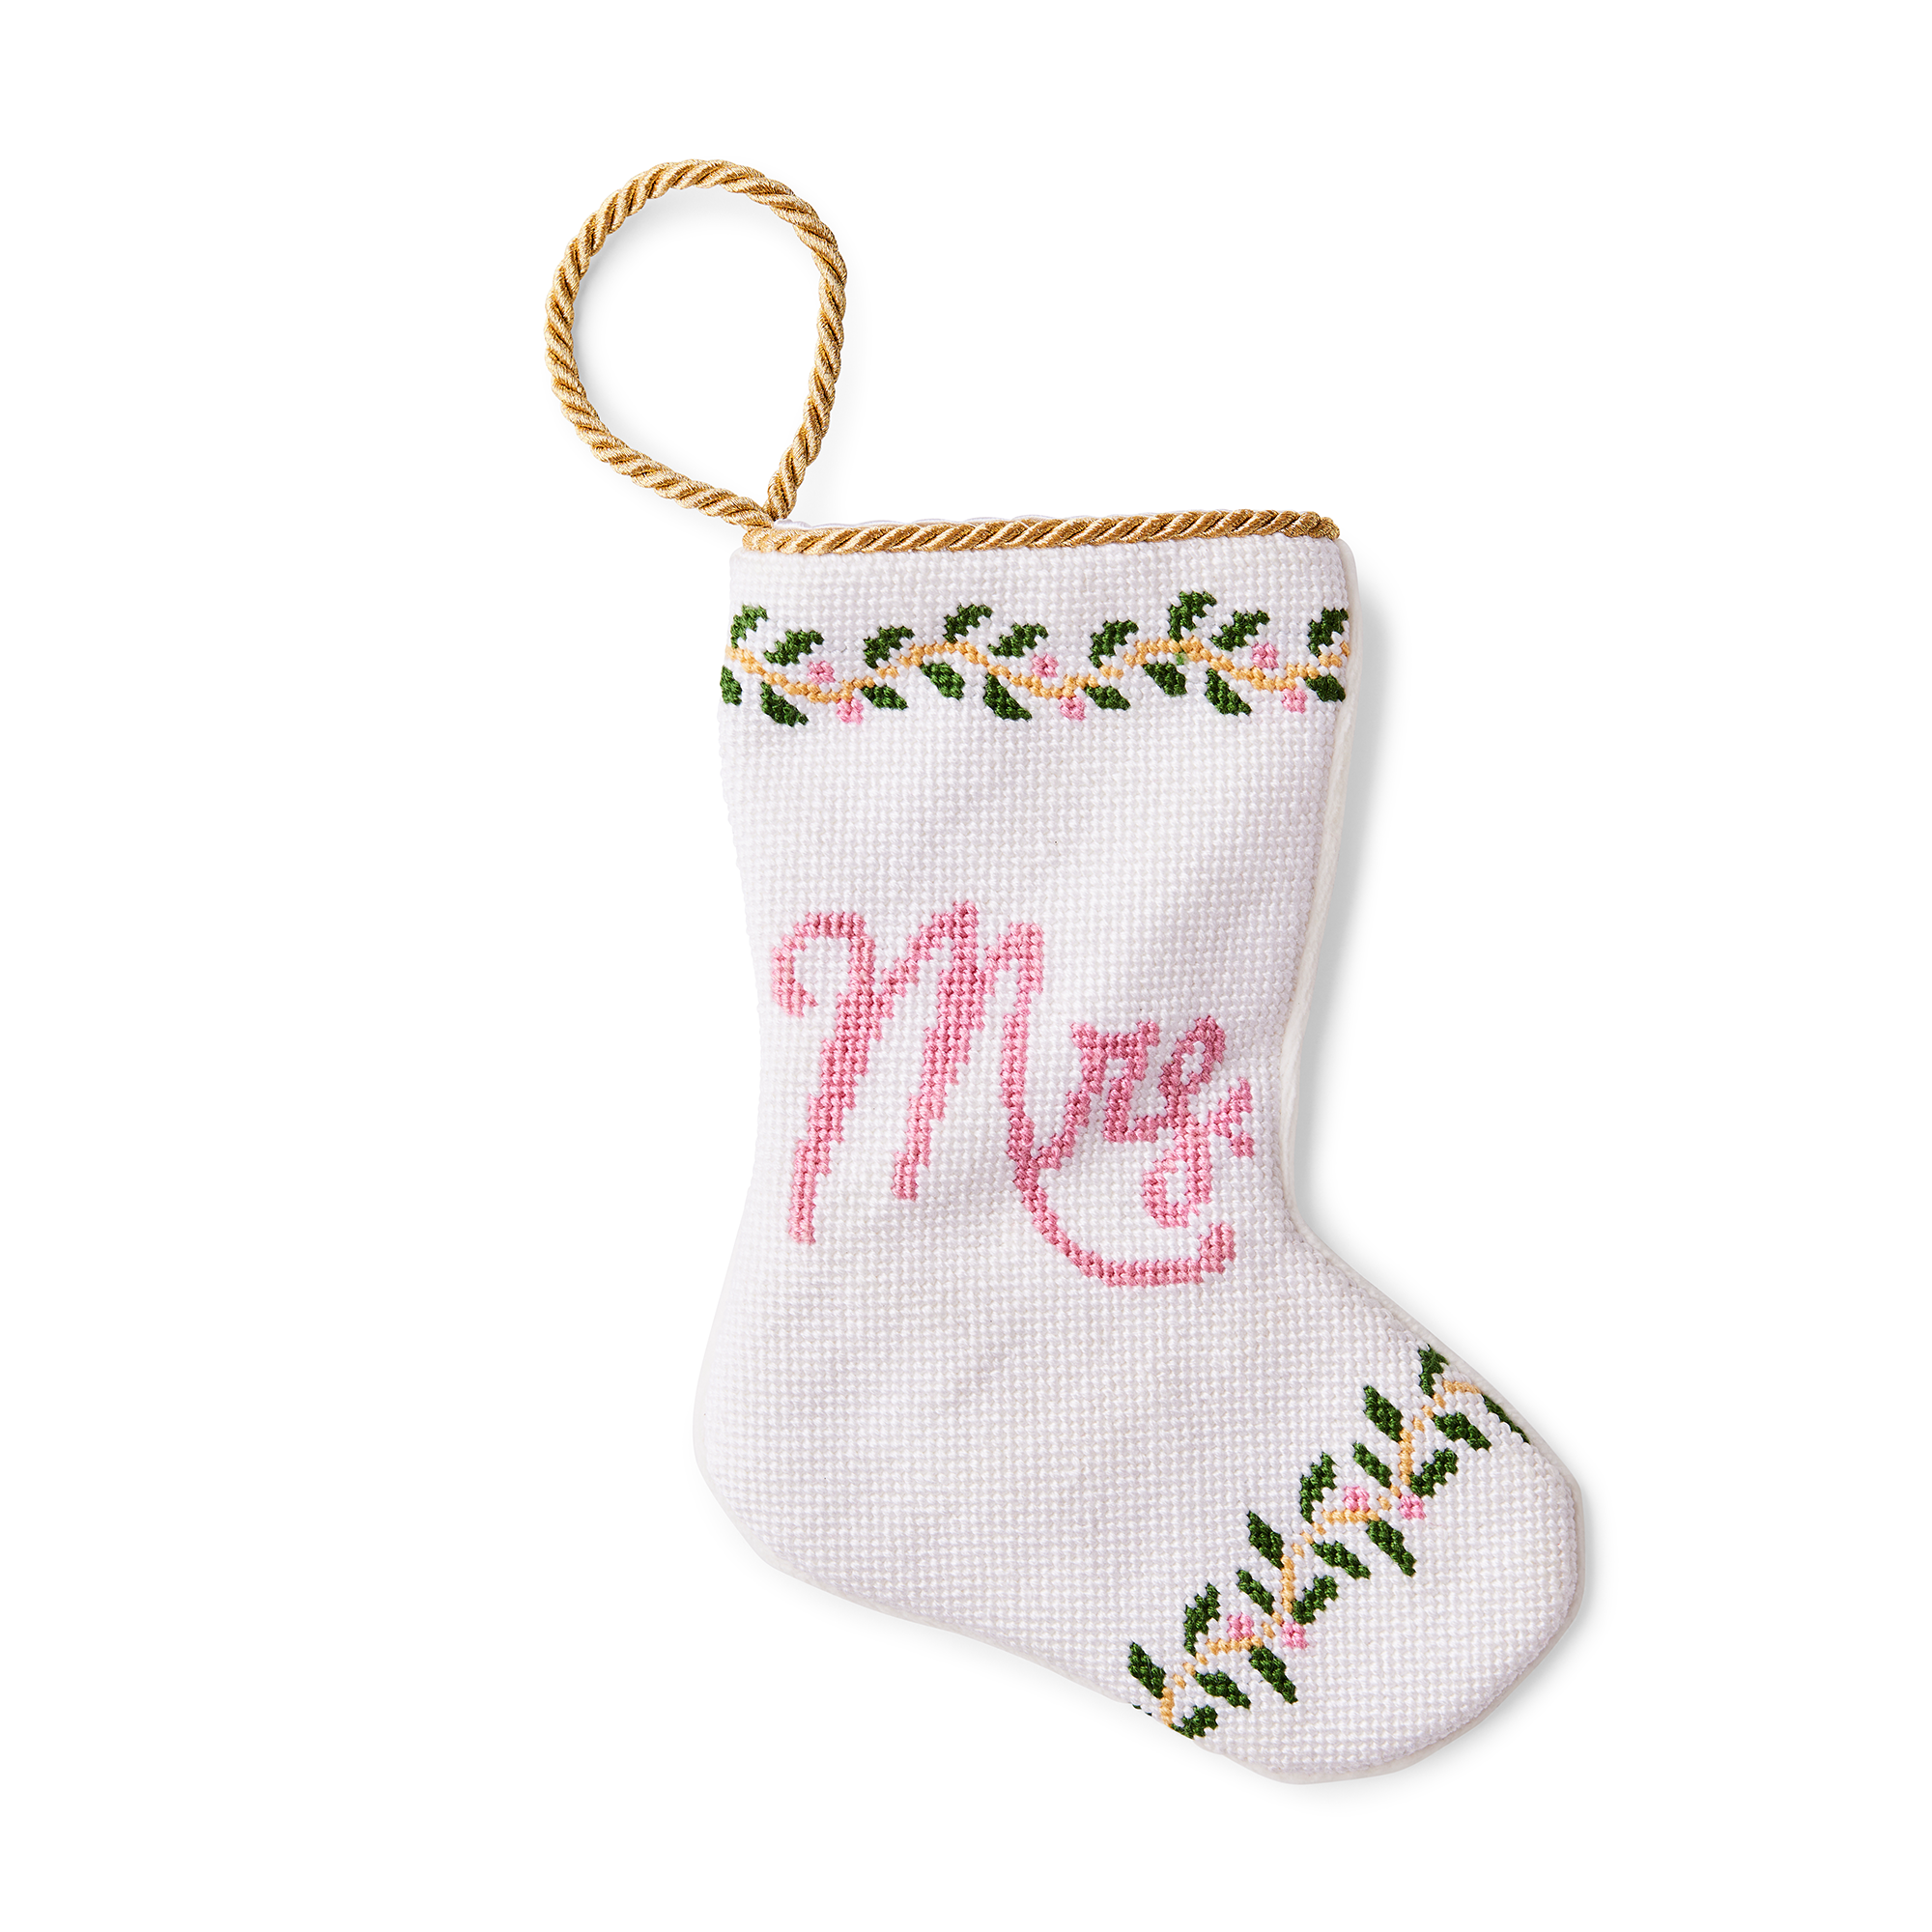 A small, intricately designed needlepoint stocking featuring the word 'Mrs.' in elegant script. The illustration is set against a delicate, wedding-themed background. Perfect for a place setting, a unique gift, or a clue to it, concert tickets, jewelry or anything else small and thoughtful.